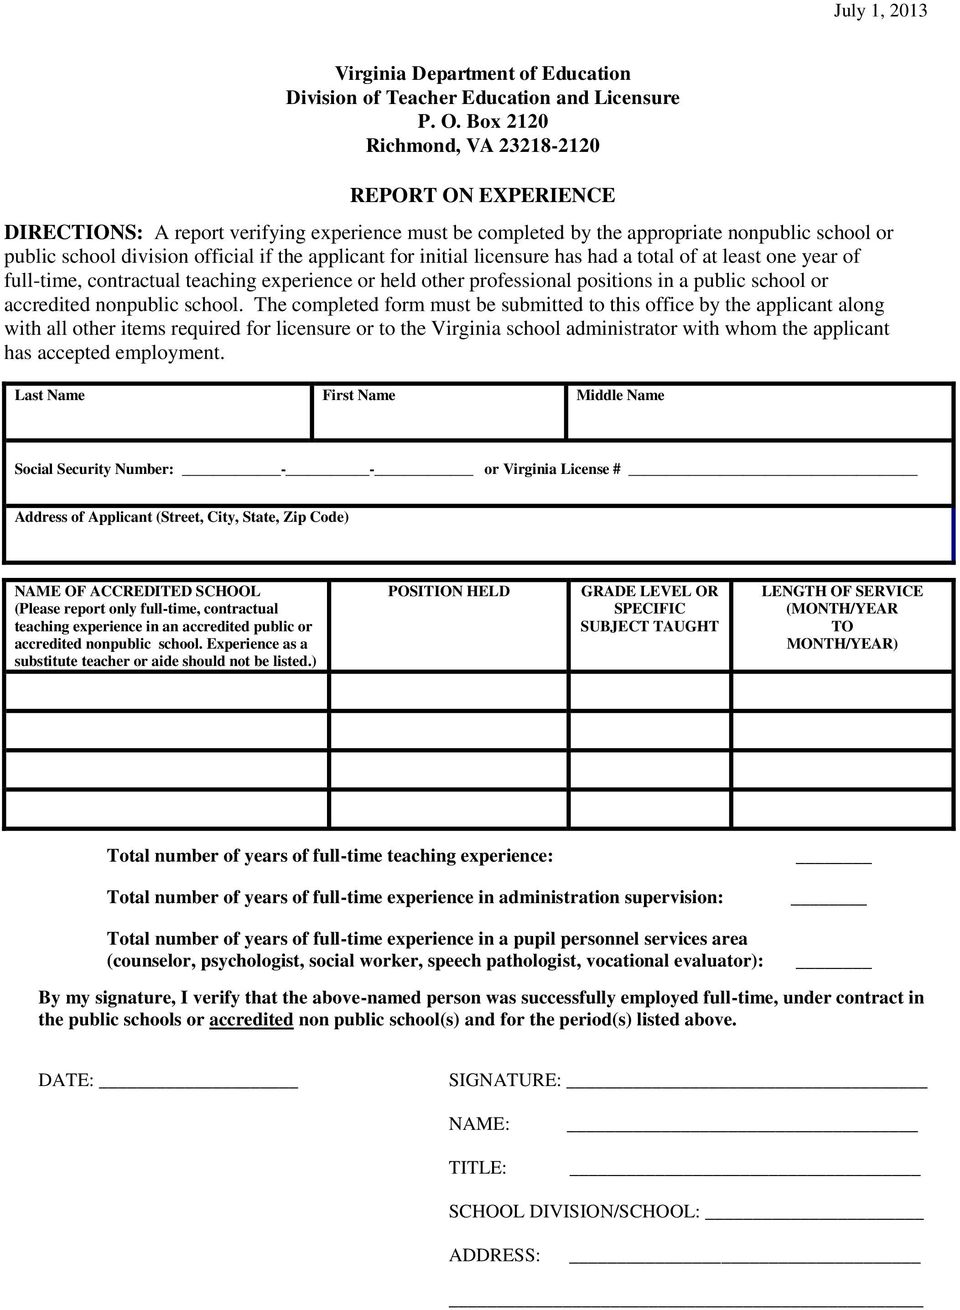 The completed form must be submitted to this office by the applicant along with all other items required for licensure or to the Virginia school administrator with whom the applicant has accepted